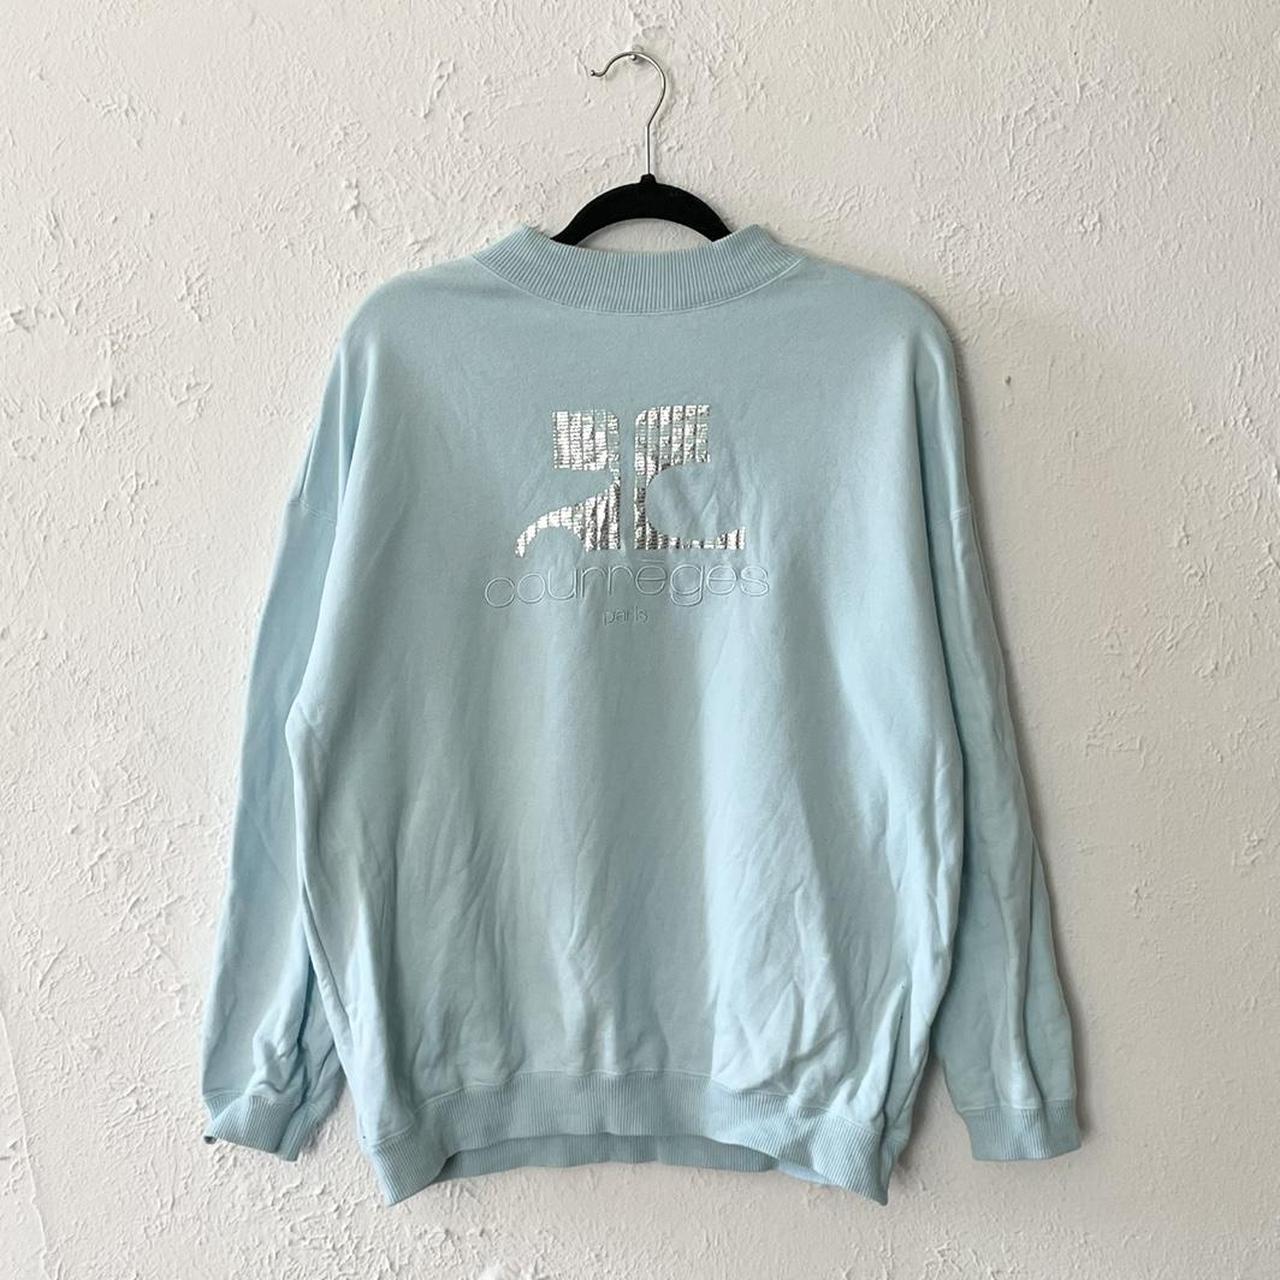 Product Image 2 - Courreges Sweatshirt

Missing size tag, fits